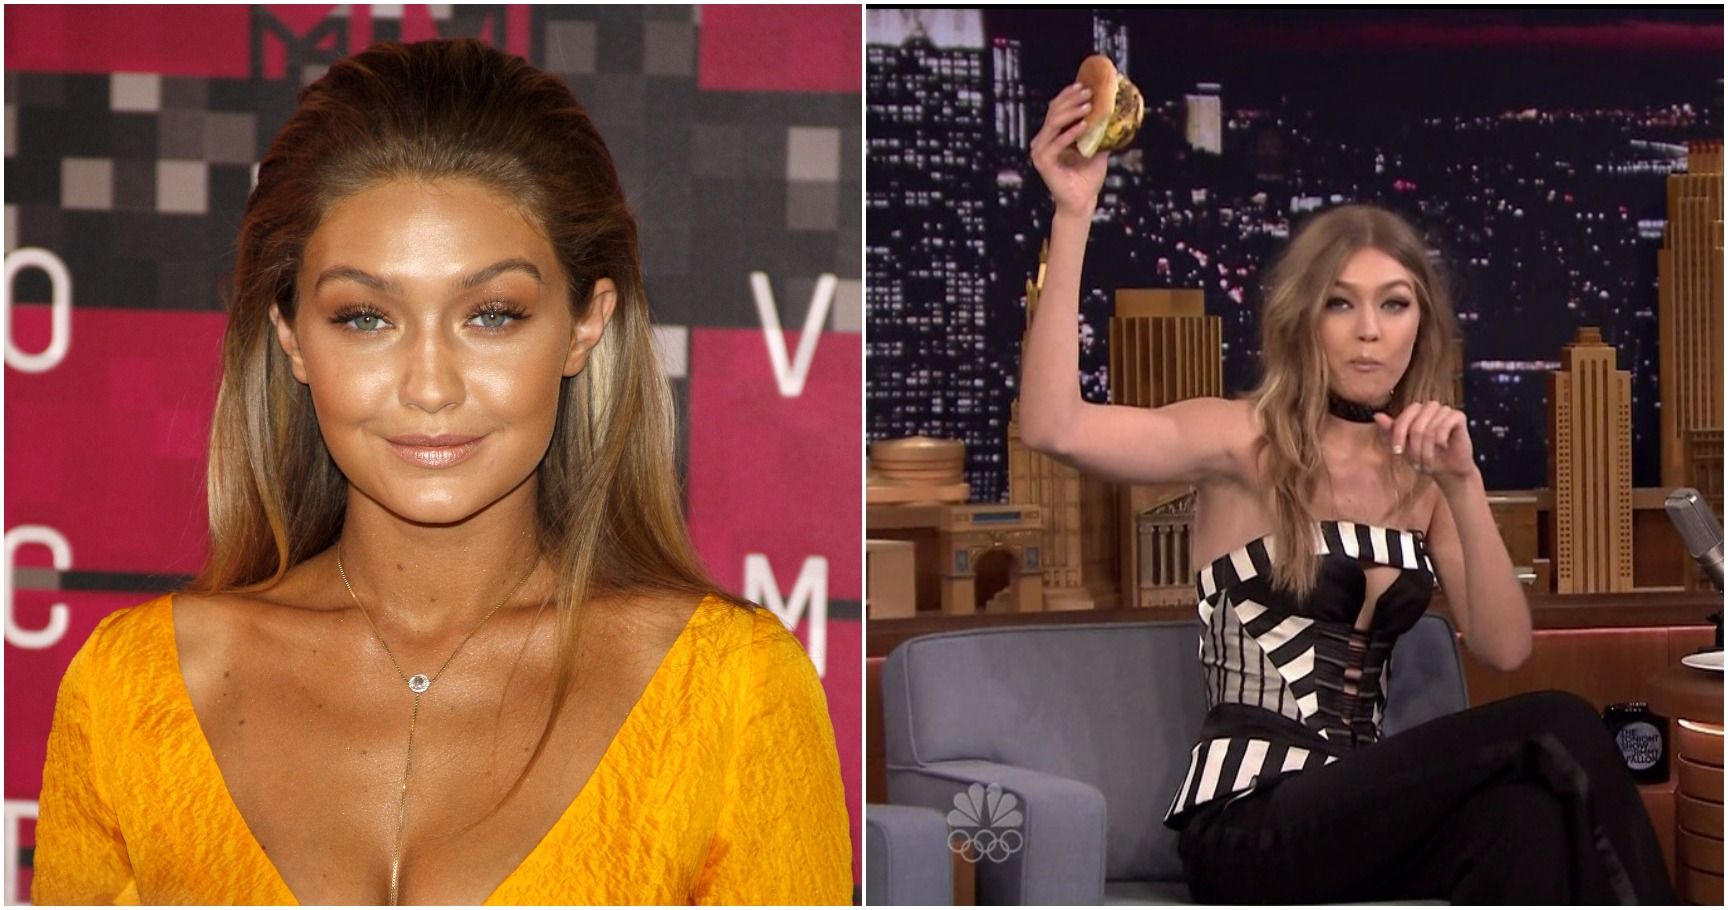 15 Things You Didn’t Know About Gigi Hadid